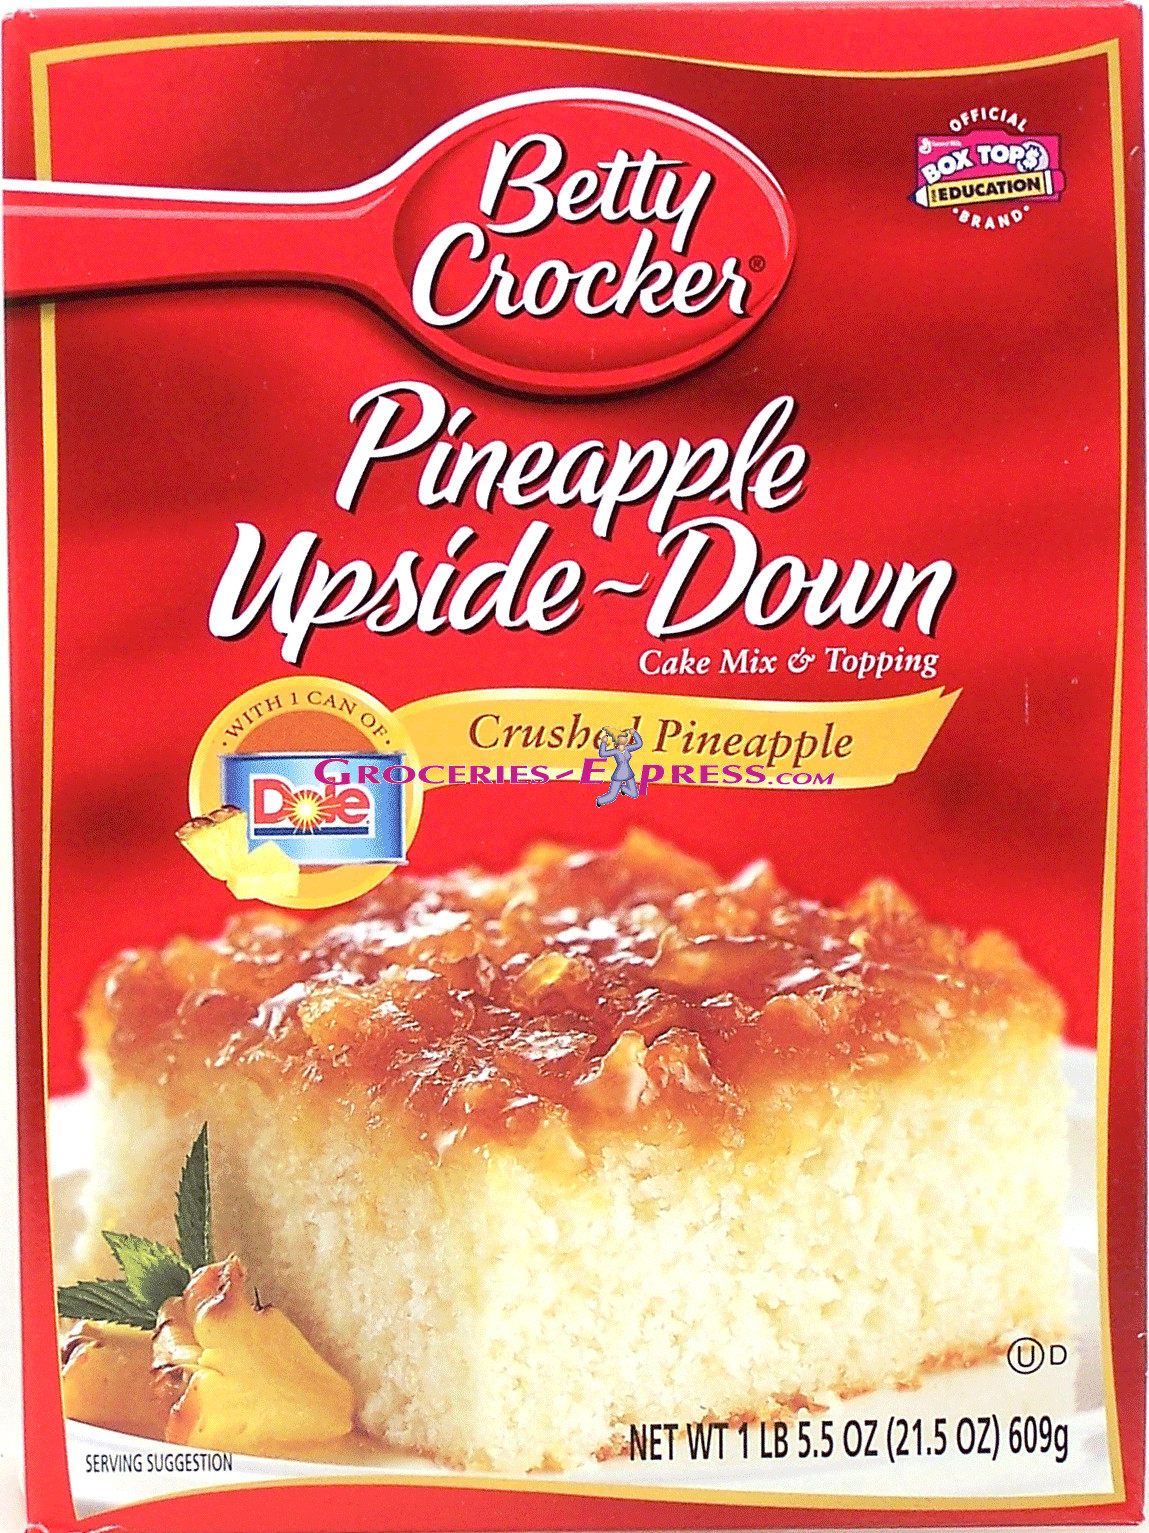 Pineapple Upside Down Cake Using Cake Mix
 Groceries Express Product Infomation for Betty Crocker